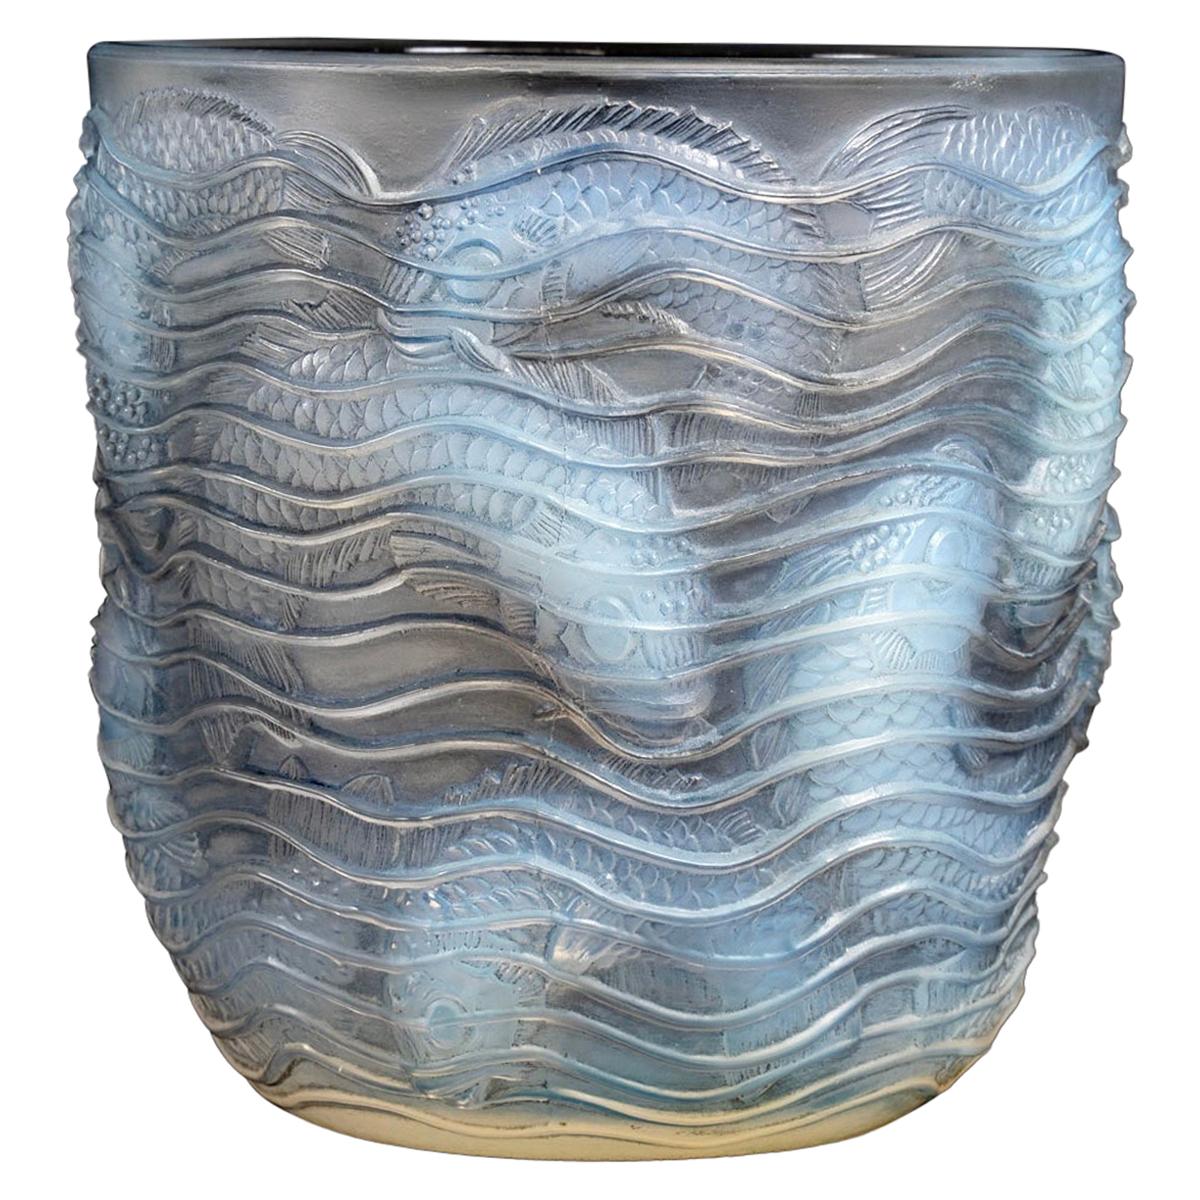 1932 René Lalique Dauphins Vase in Opalescent Glass with Grey Patina Dolphins